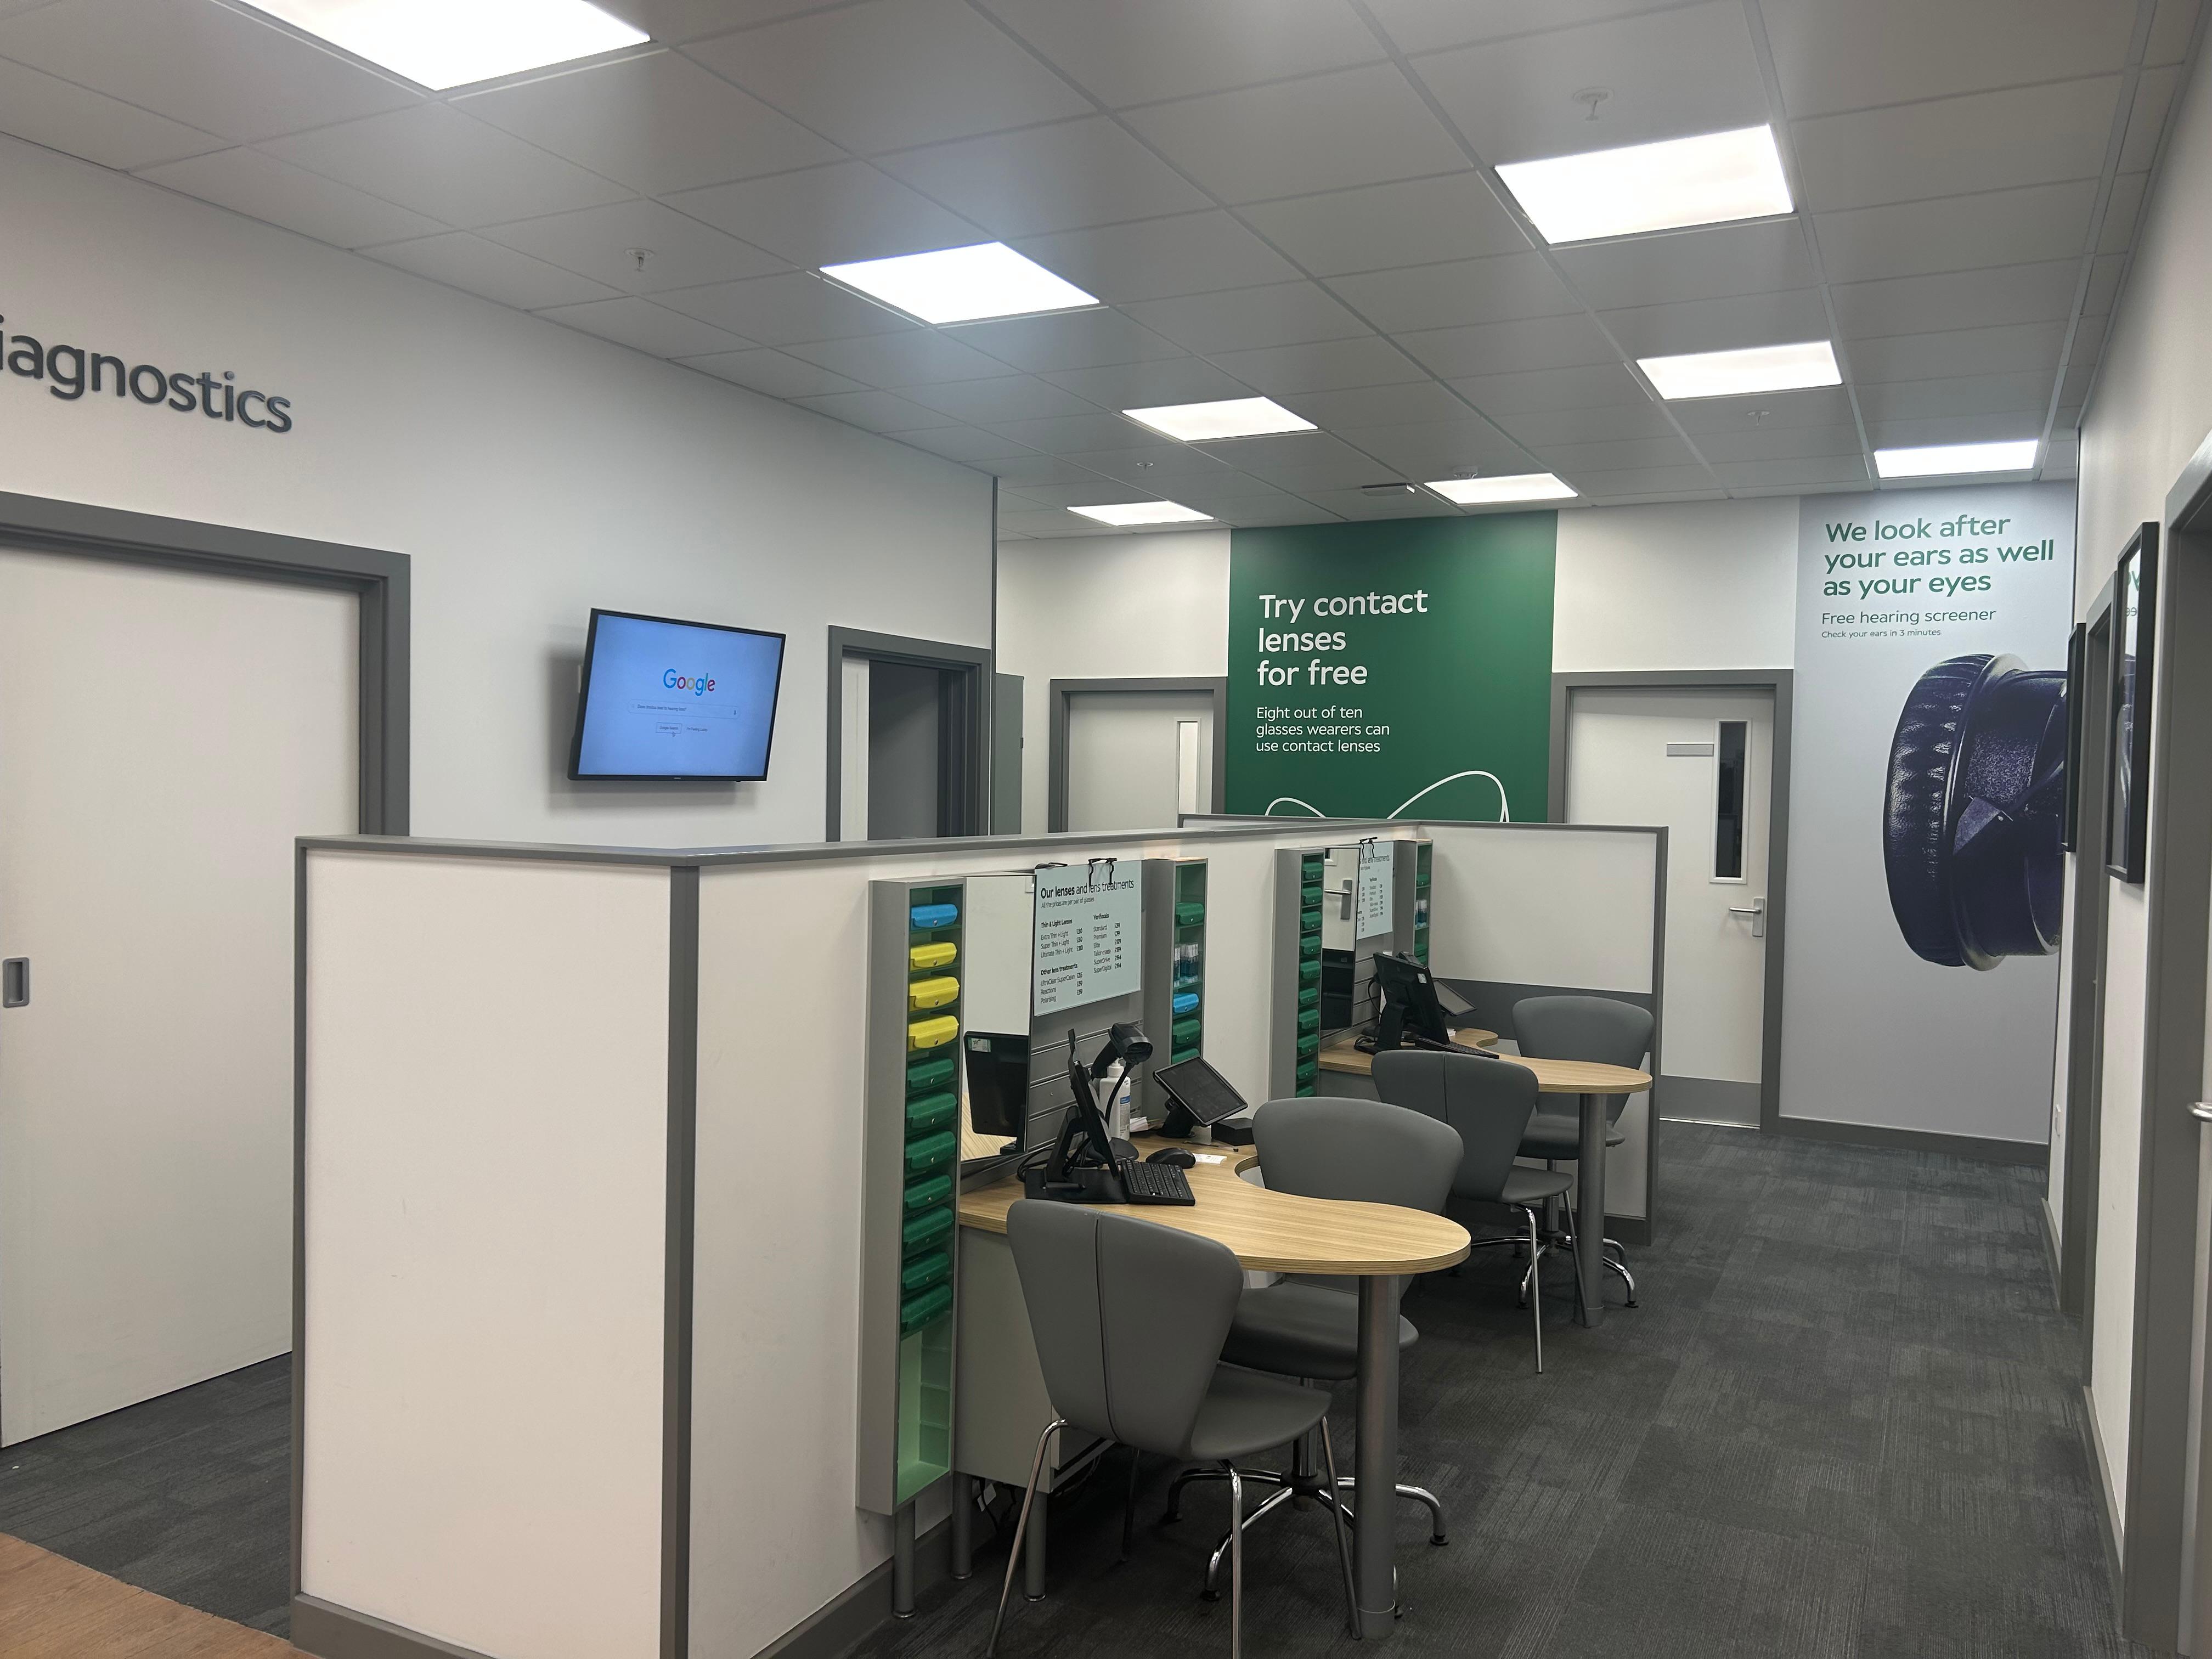 Specsavers Opticians and Audiologists - Upton Sainsbury's Specsavers Opticians and Audiologists - Upton Sainsbury's Wirral 01515 591226